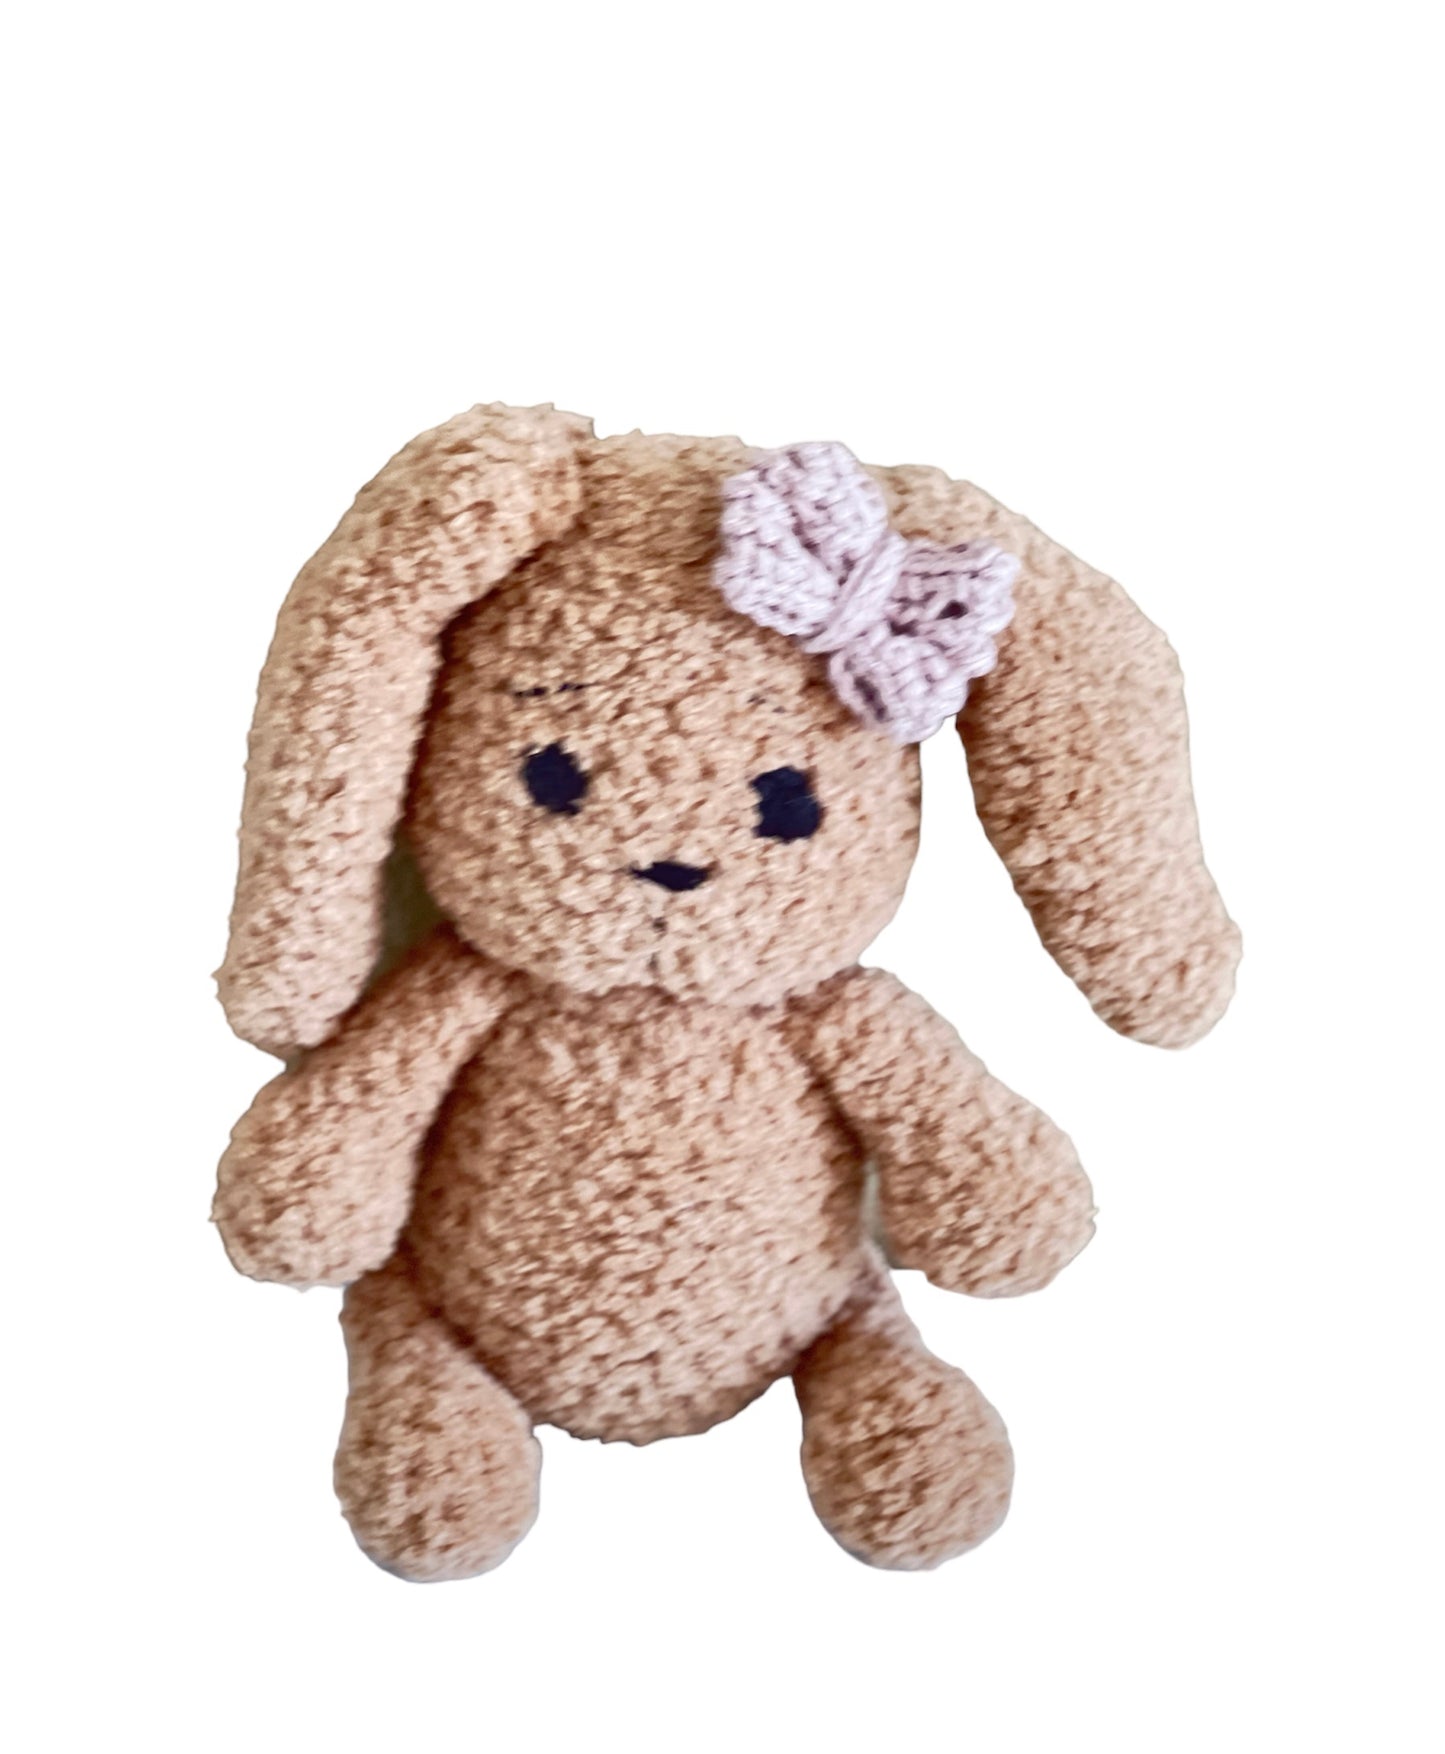 Bunny Doll, Stuffed Animal, Crochet Bunny Rabbit, Baby Gift, Eyes closed, Gift for Kid, Gift for toddler, Easter gift, Bunnies